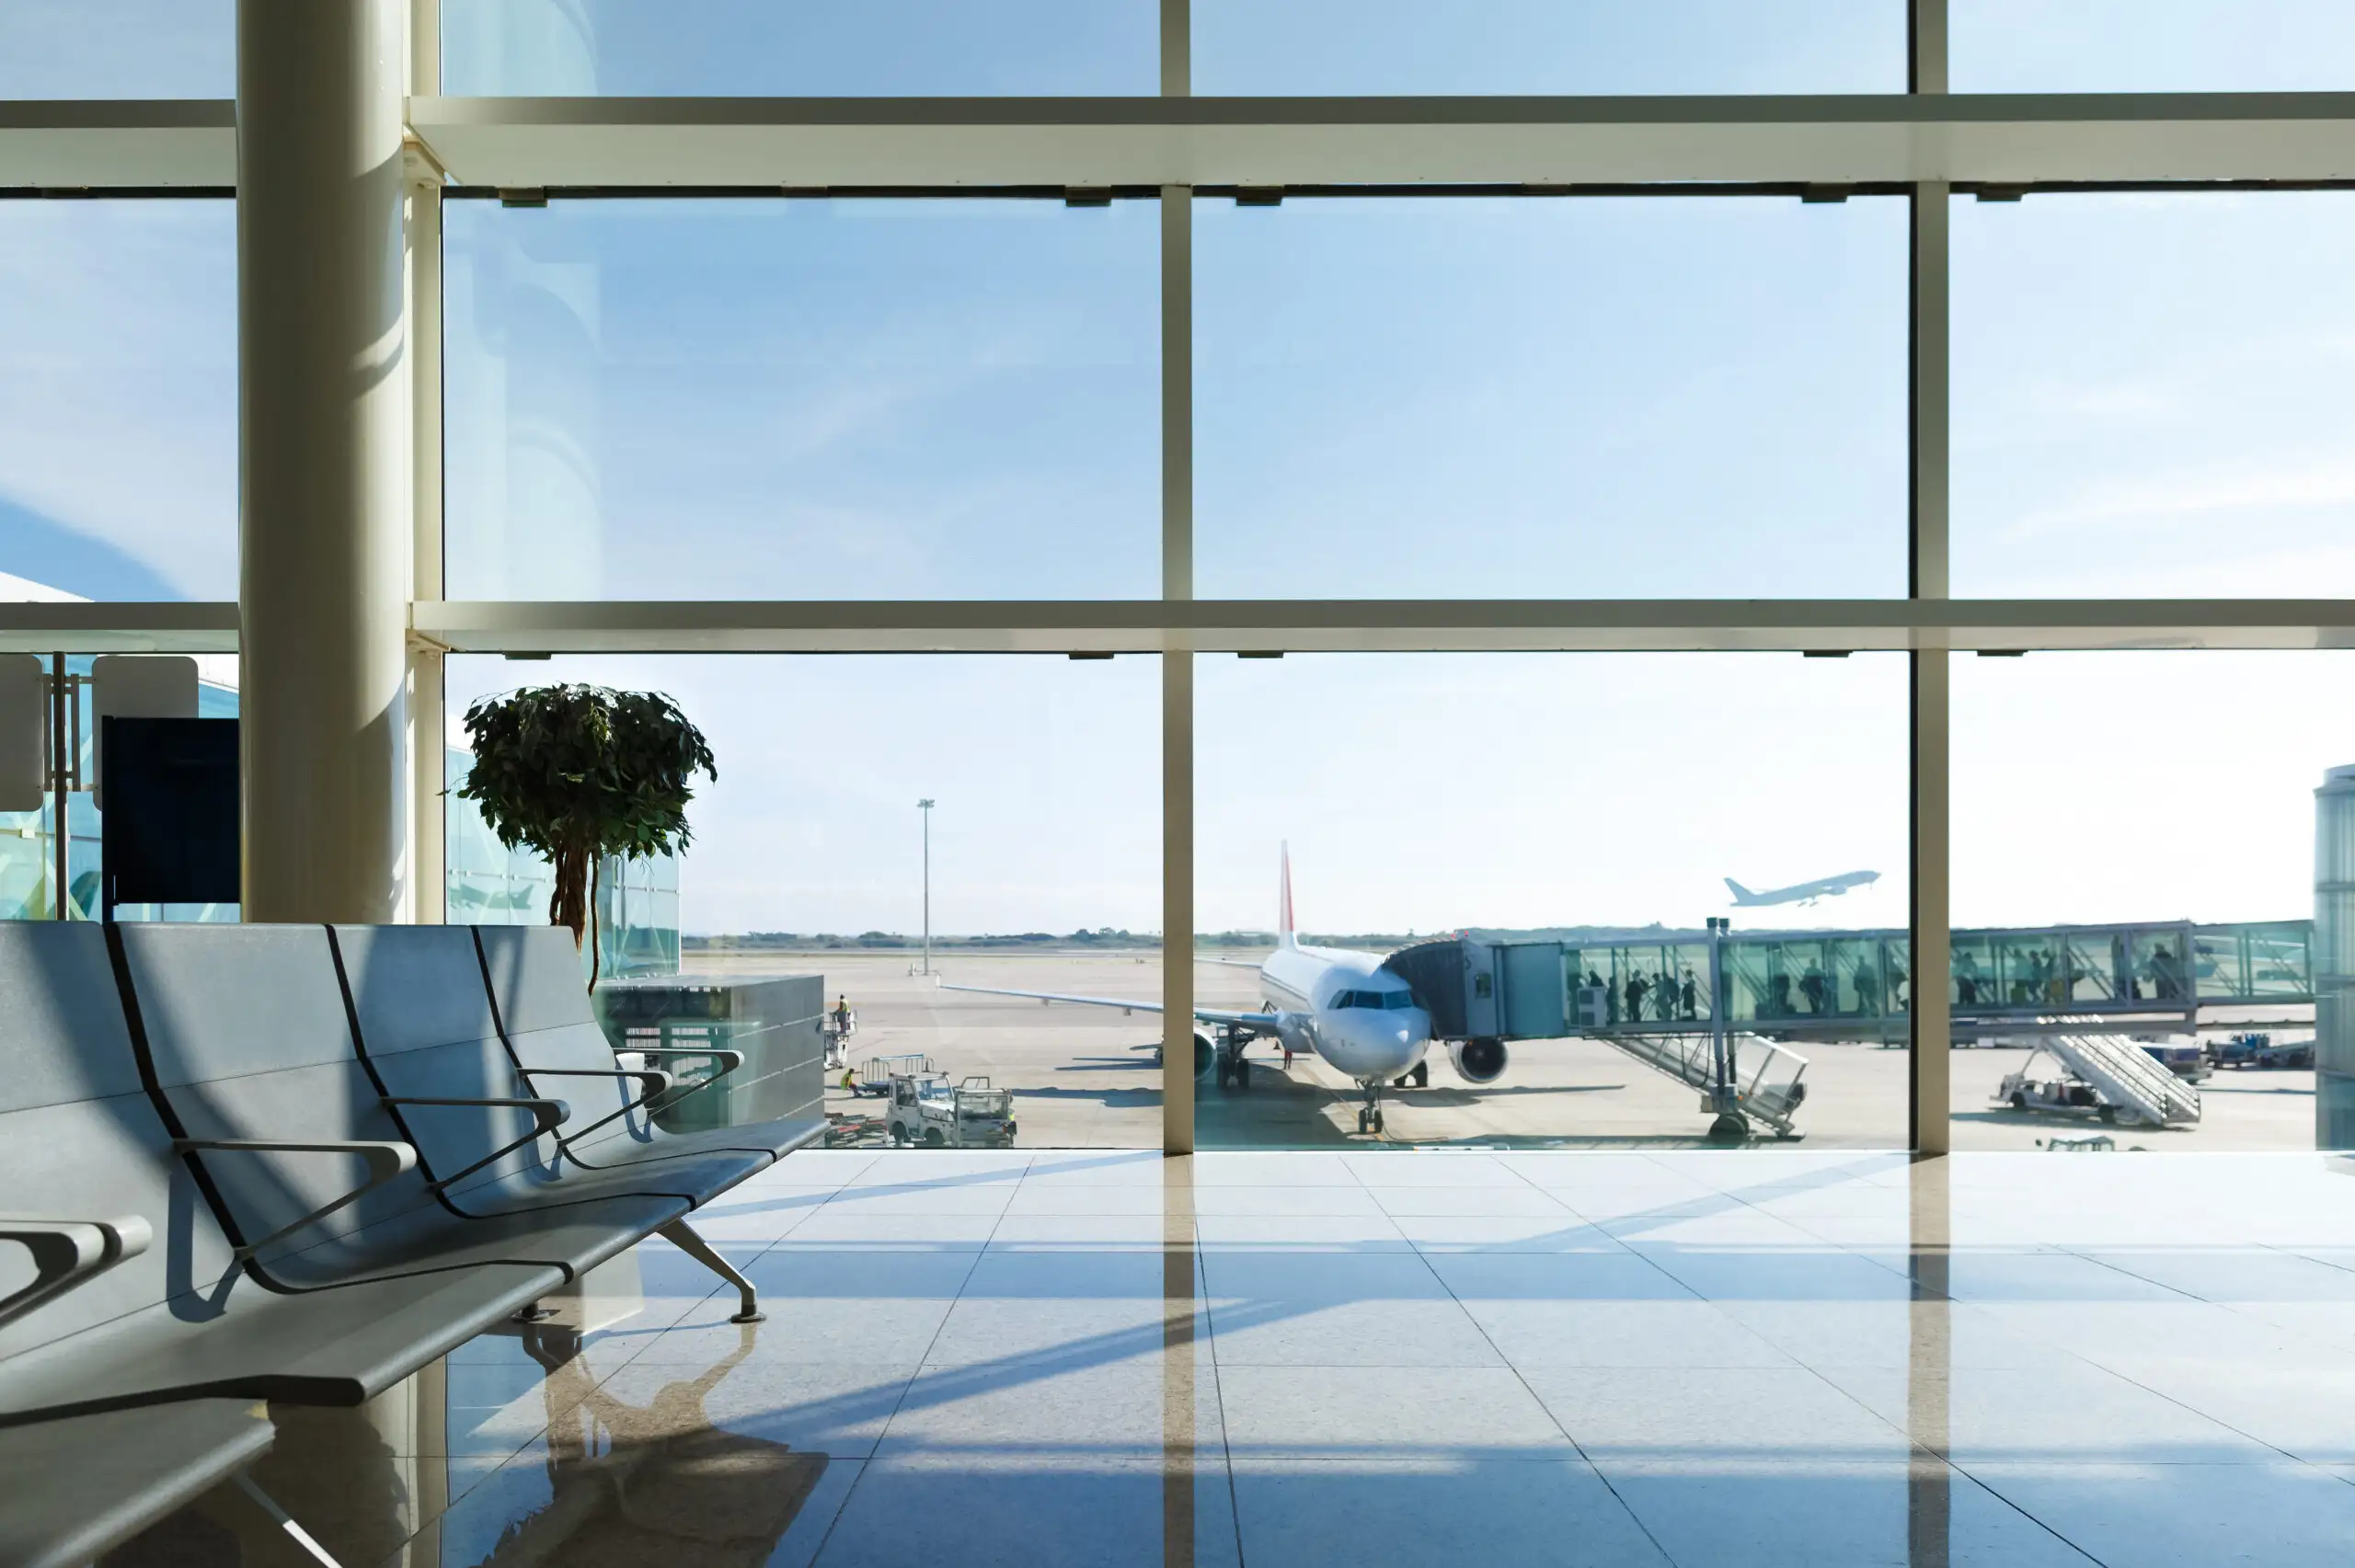 Empty airport terminal with large window